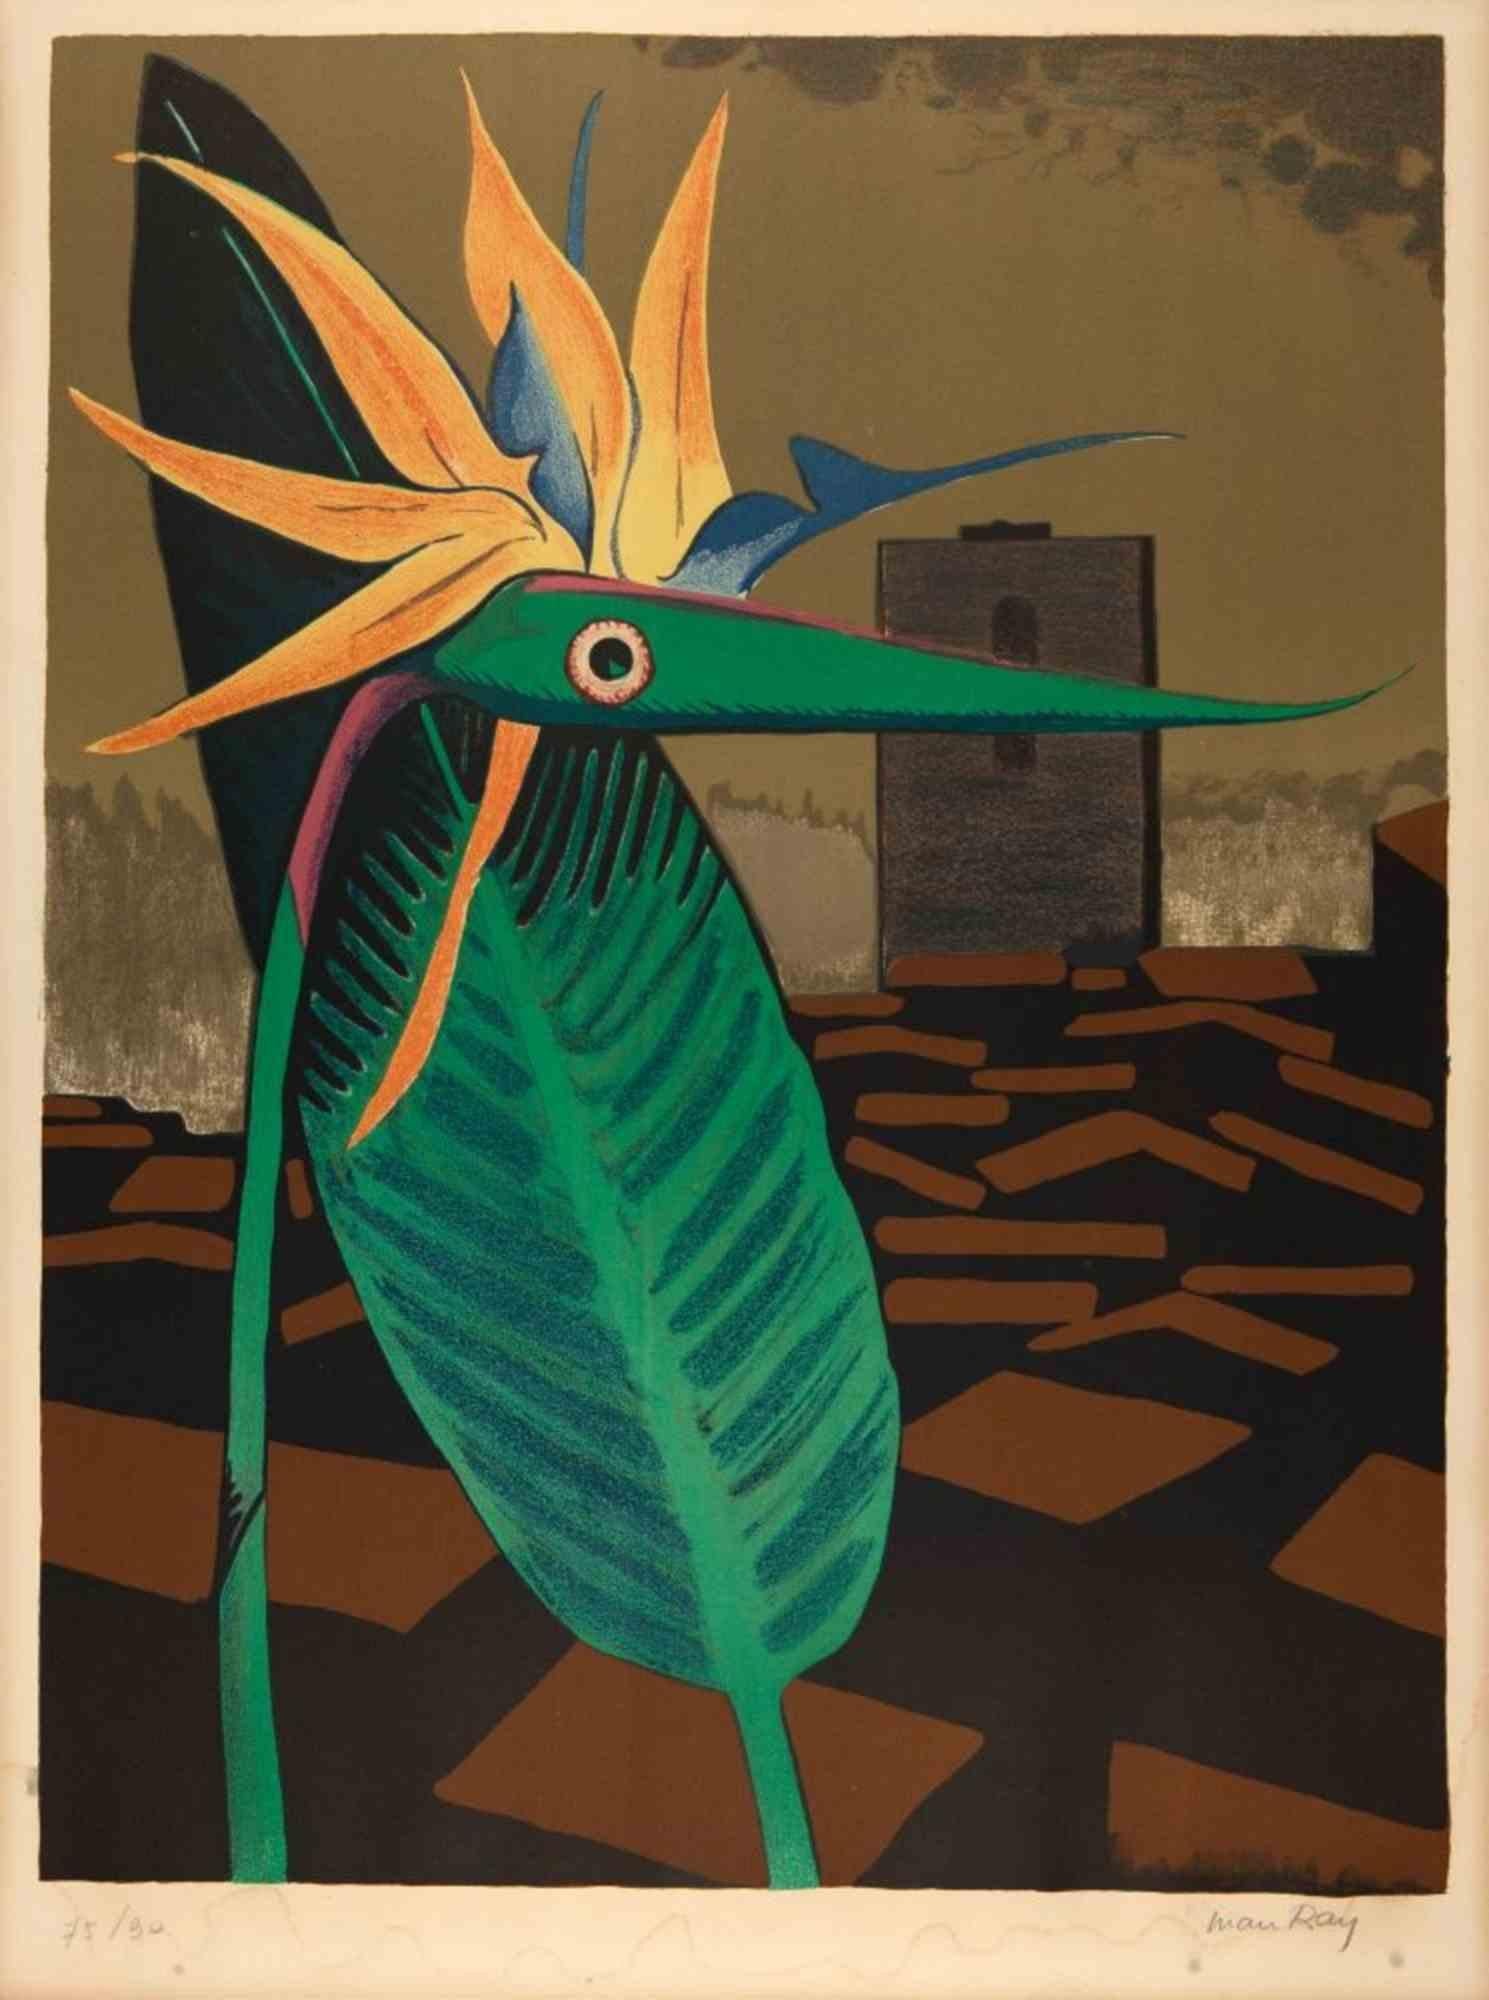 L'Incompris or The misunderstood is a color lithograph on wove paper realized by Man Ray in 1962. 

Signed in the lower right.

Edition of 75/90.

Image dimension: 60.5 x 46cm - Sheet Dimension 66.5 x 49.5 cm

Ref. Anselmino 39.

Very Good